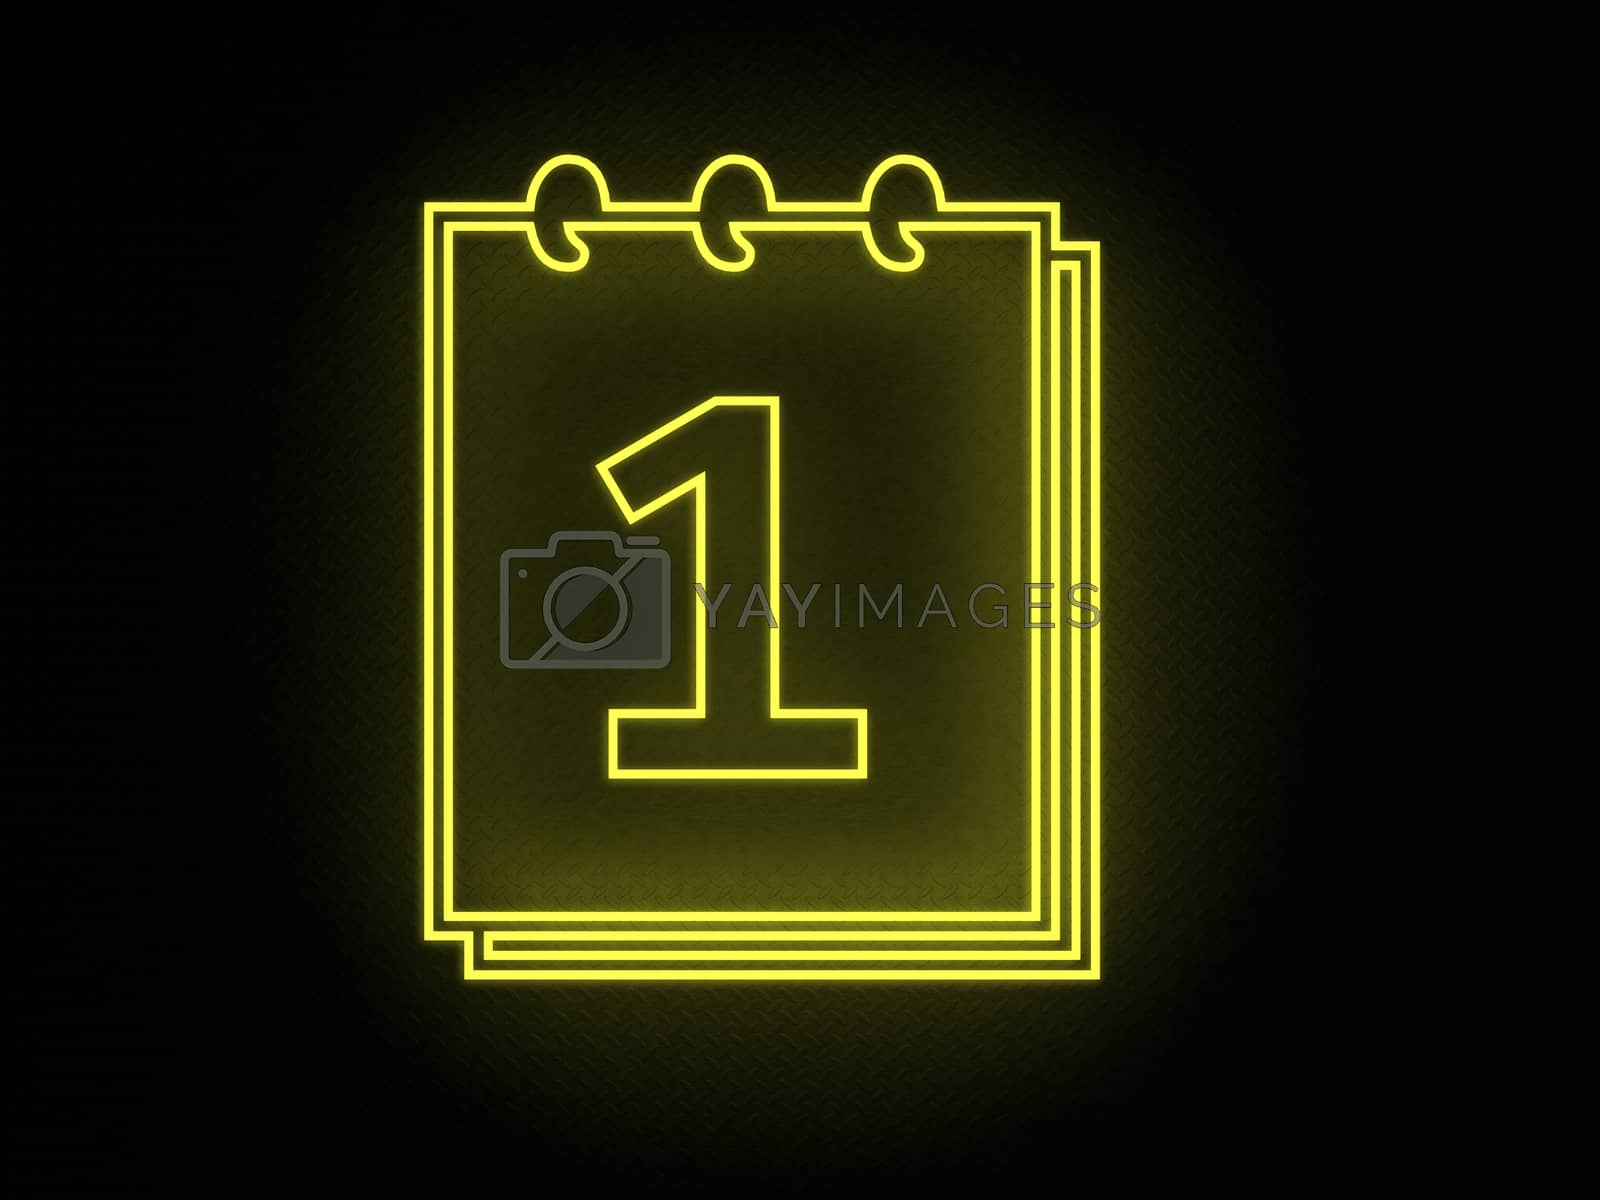 Royalty free image of 3d render yellow number 1 neon isolated on black background by ingalinder